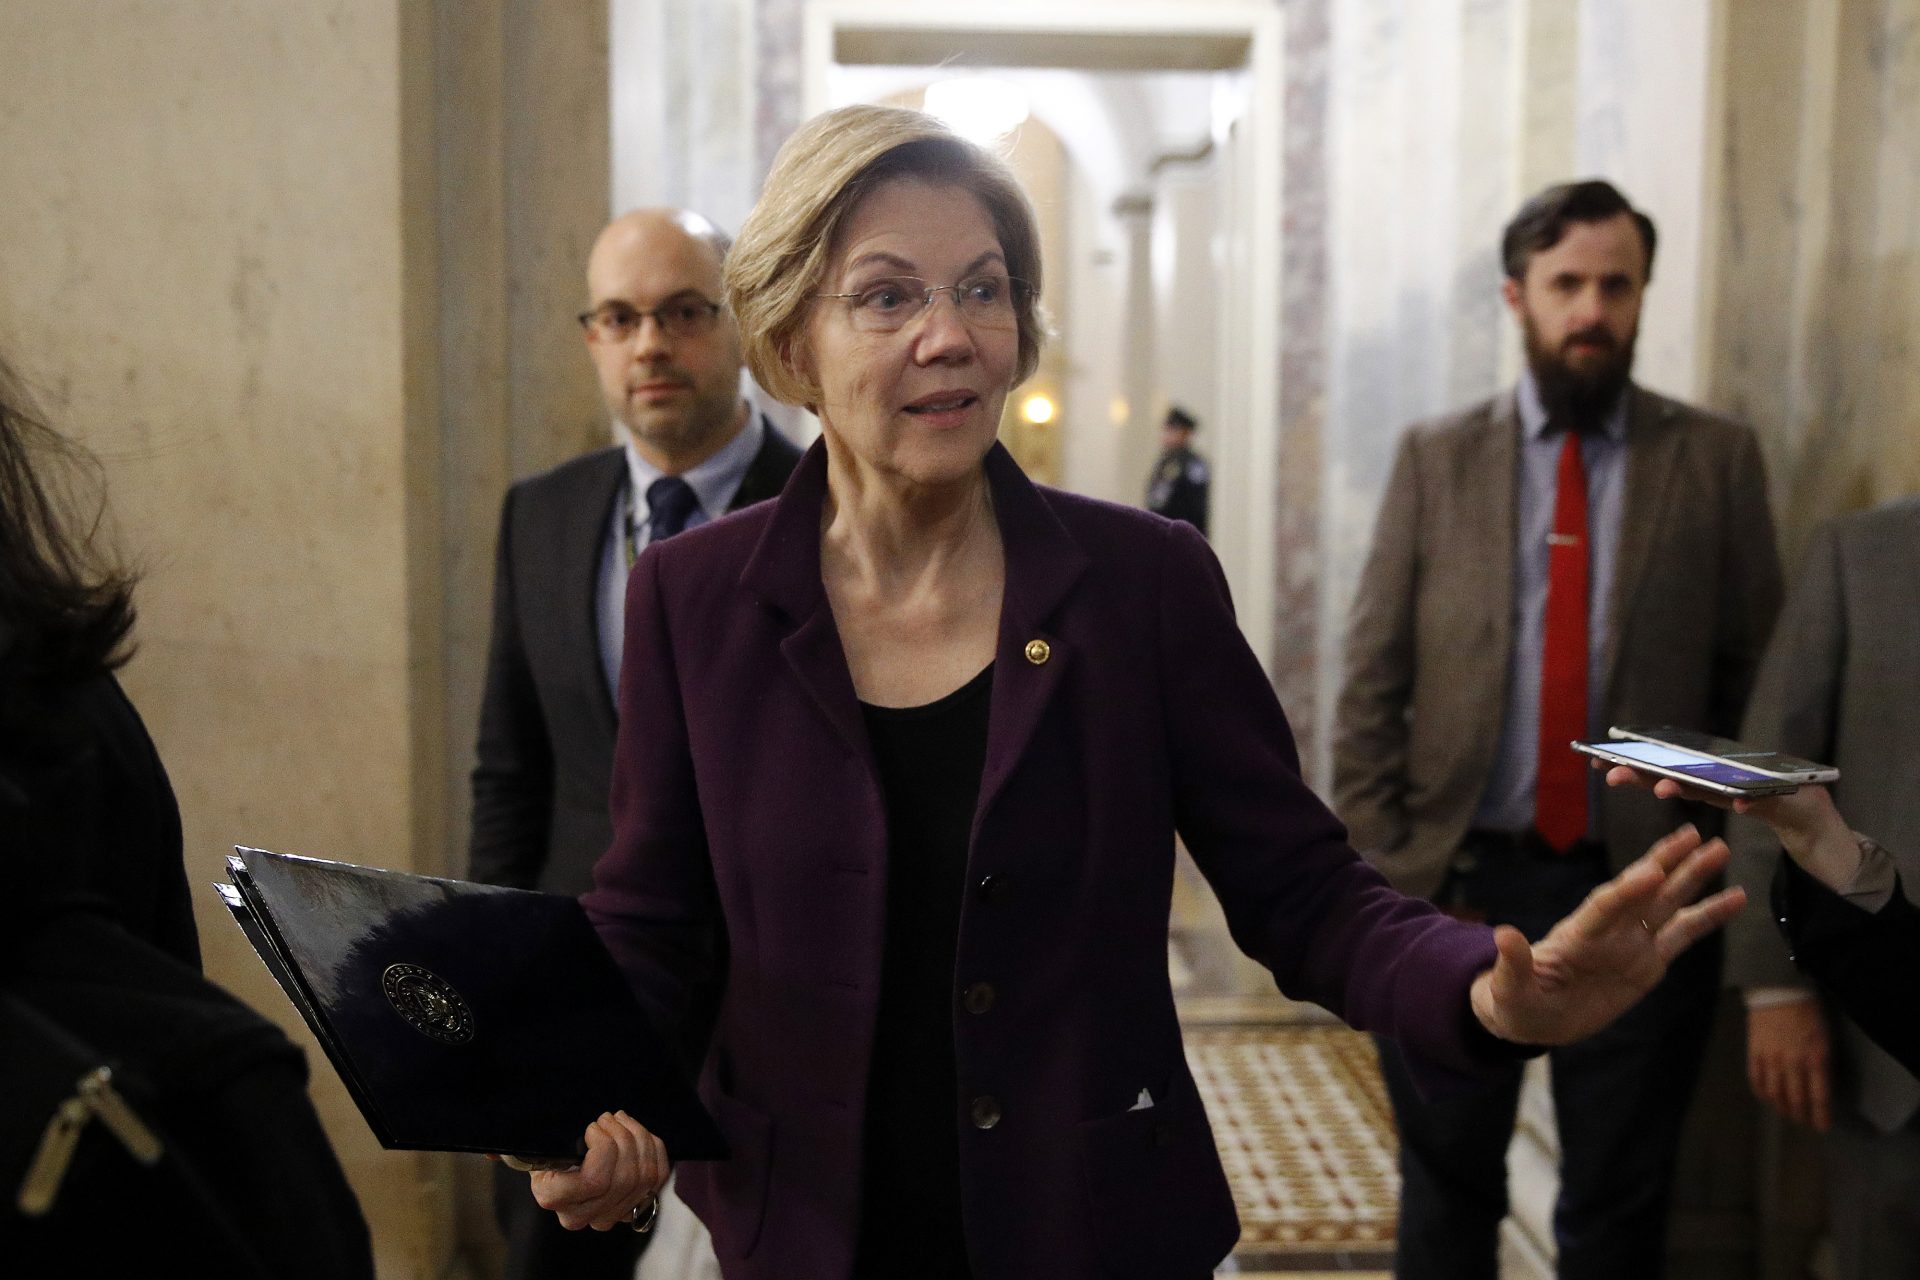 Sen. Elizabeth Warren, D-Mass., speaks with reporters as she departs at the end of the day in the impeachment trial of President Donald Trump on charges of abuse of power and obstruction of Congress on Capitol Hill in Washington, Wednesday, Jan. 29, 2020.